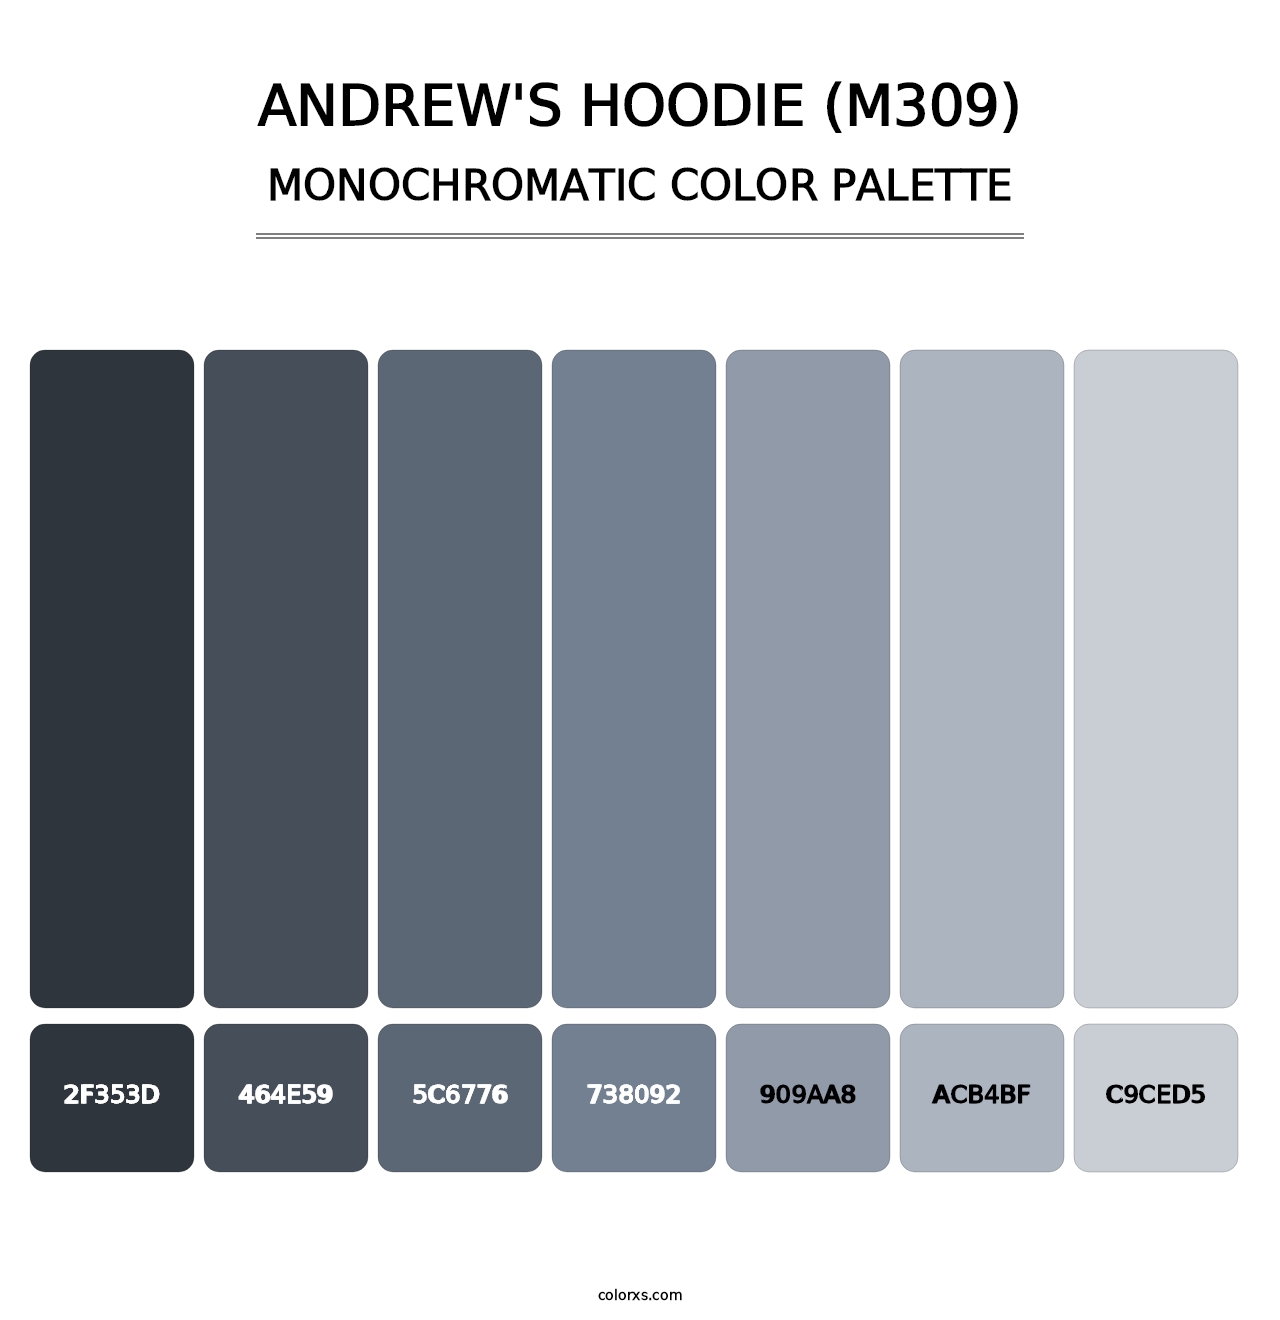 Andrew's Hoodie (M309) - Monochromatic Color Palette